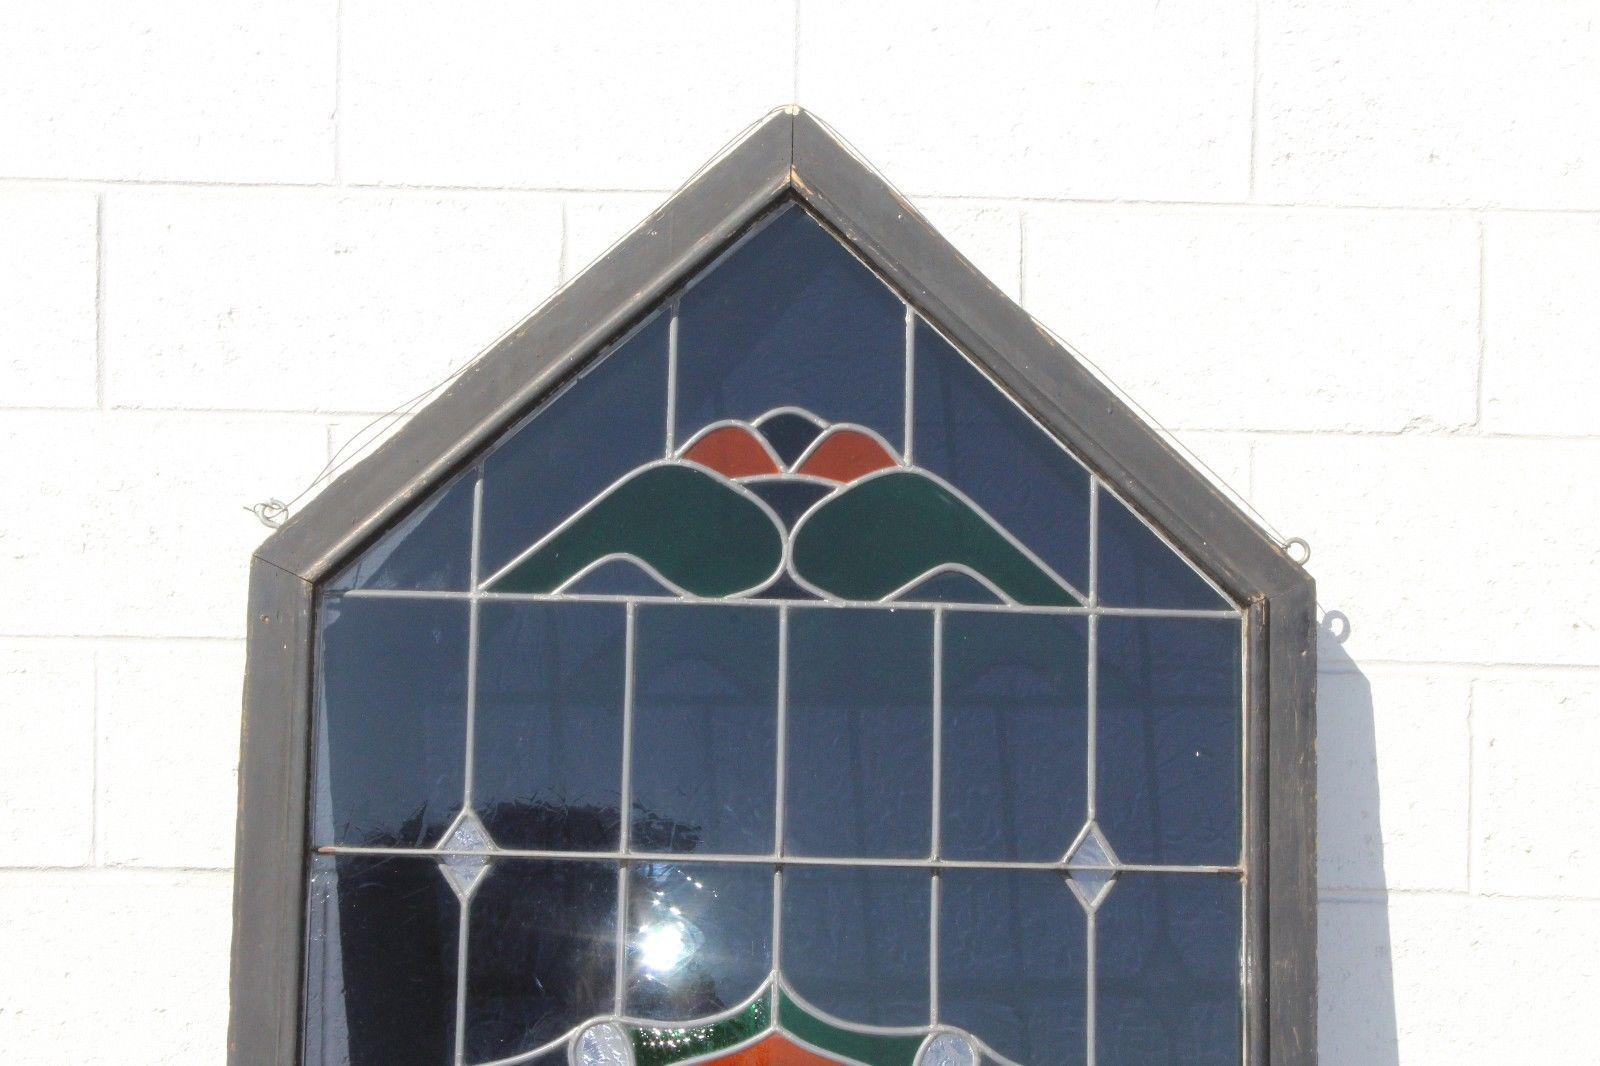 This item is an original stained glass window panel from the Riviera Country Club of Beverly Hills California. 

The Riviera was founded by members of the Los Angeles Athletic Club in 1922 and opened in 1927. It has been synonymous with luxury,